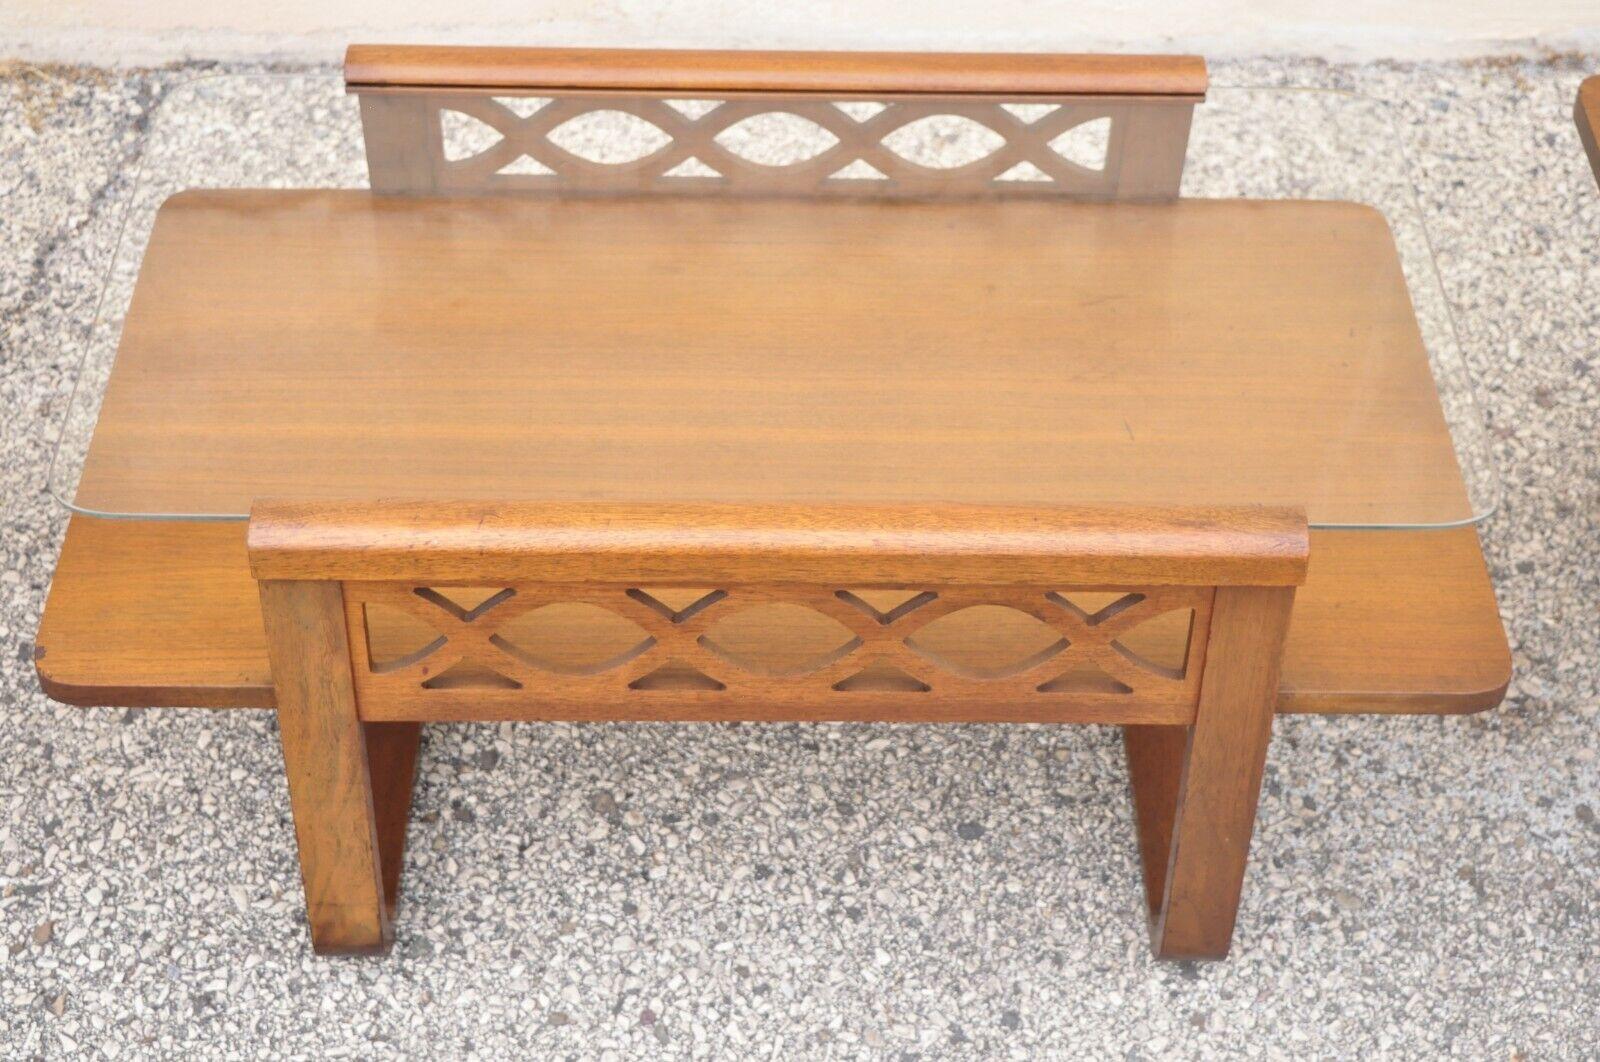 Vintage Art Deco Mid-Century Mahogany & Glass Coffee Table Set by Superior 3 Pc For Sale 6